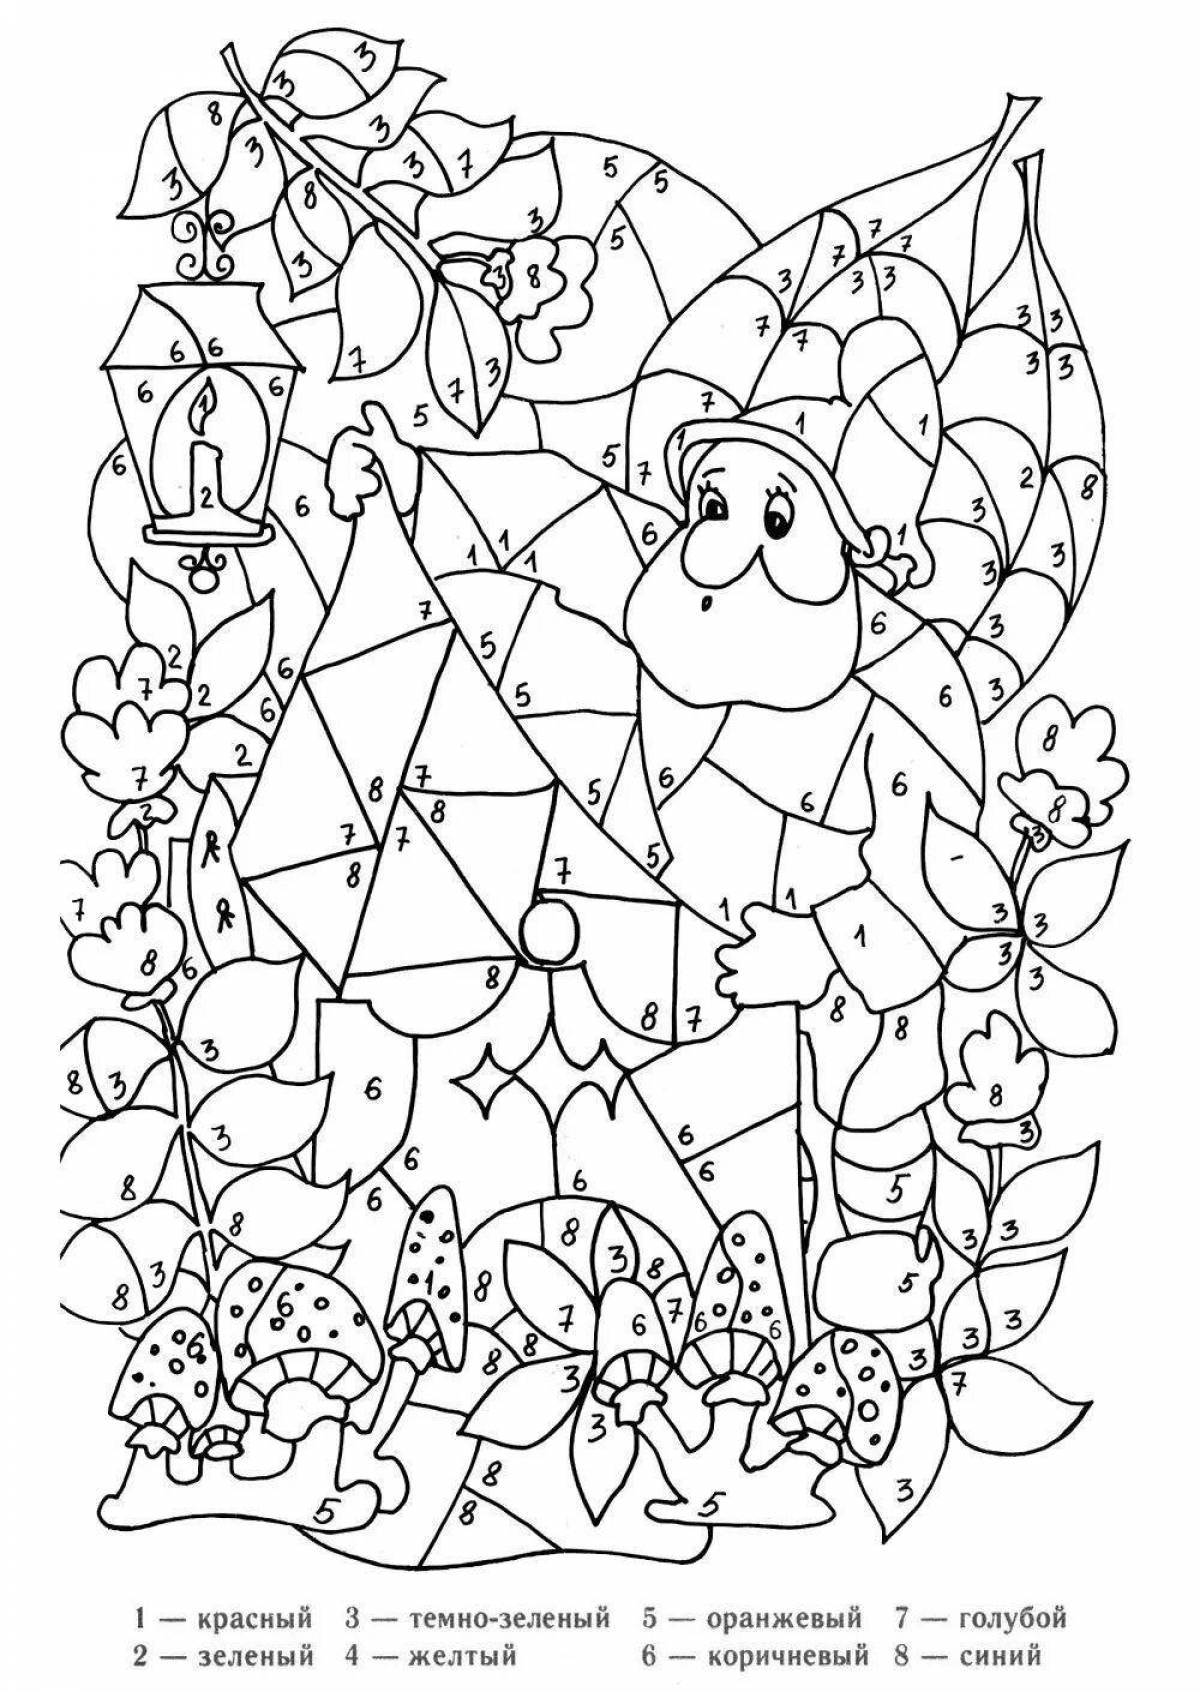 Fun coloring pages for mosaic figurines